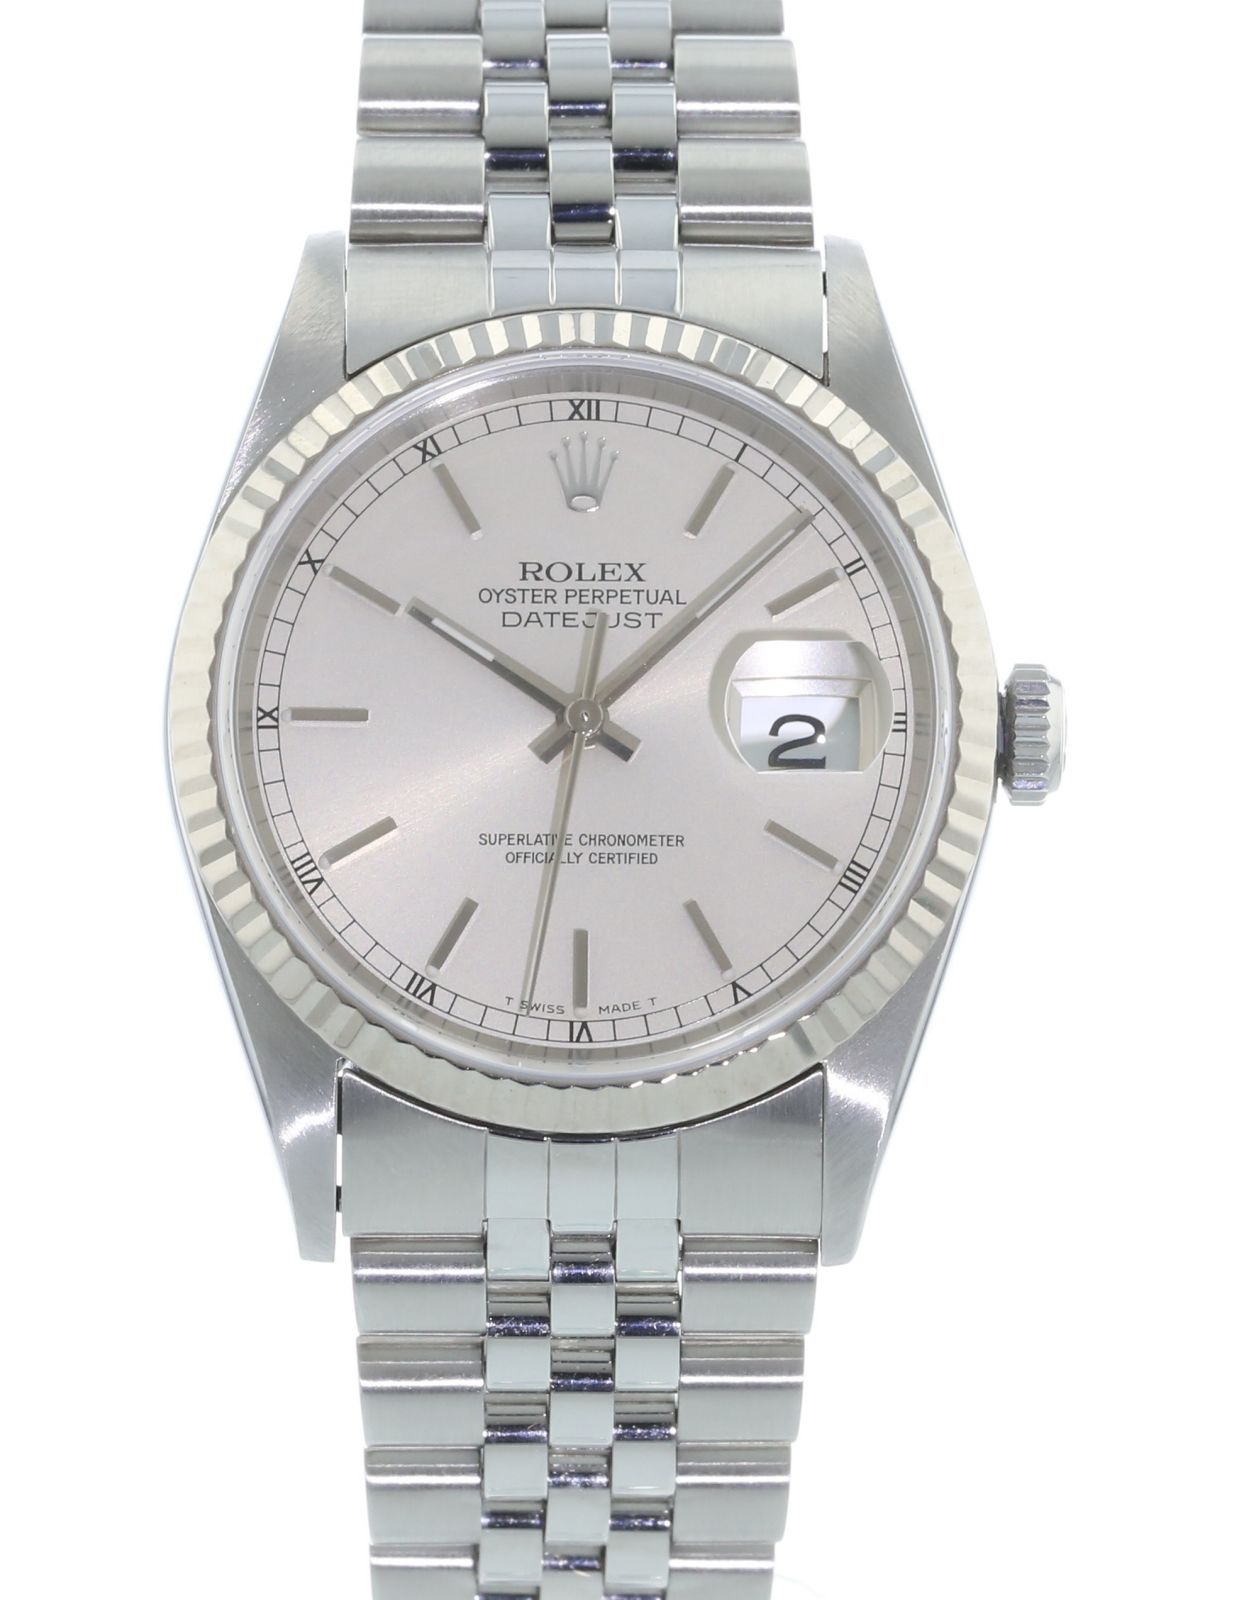 Authentic Used Rolex Datejust 16234 Watch (10-10-ROL-KXRENT)